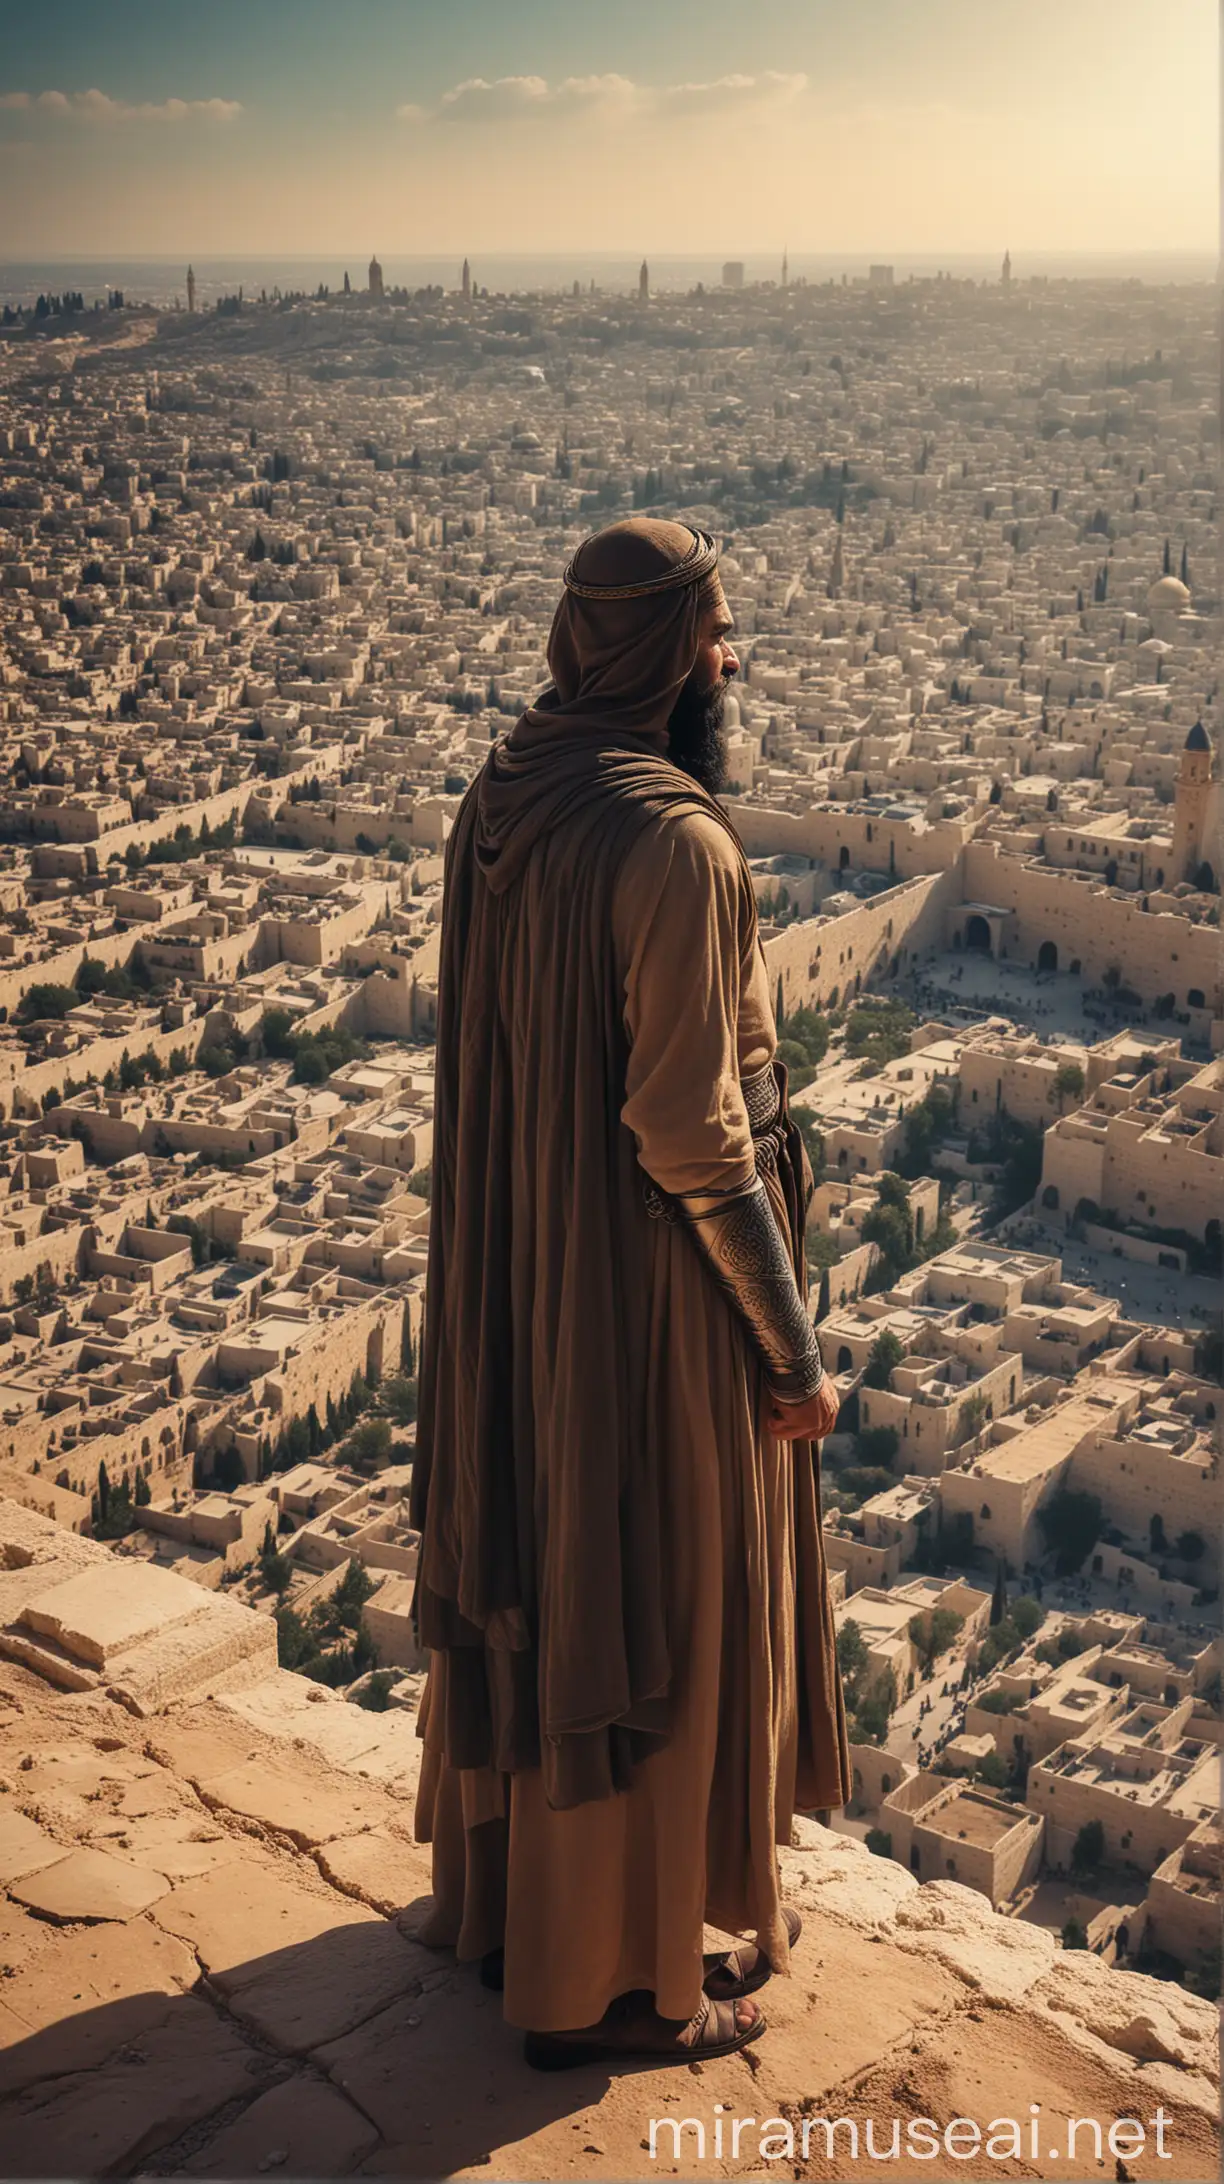 Image Prompt: Show Saladin, the Muslim leader, standing resolutely in the scorching heat of 1187, overlooking the city of Jerusalem, with his army assembled behind him. Describe the determination in his eyes as he prepares to reclaim the holy city from the Crusaders.
 with islamic  tradition HD and 4K